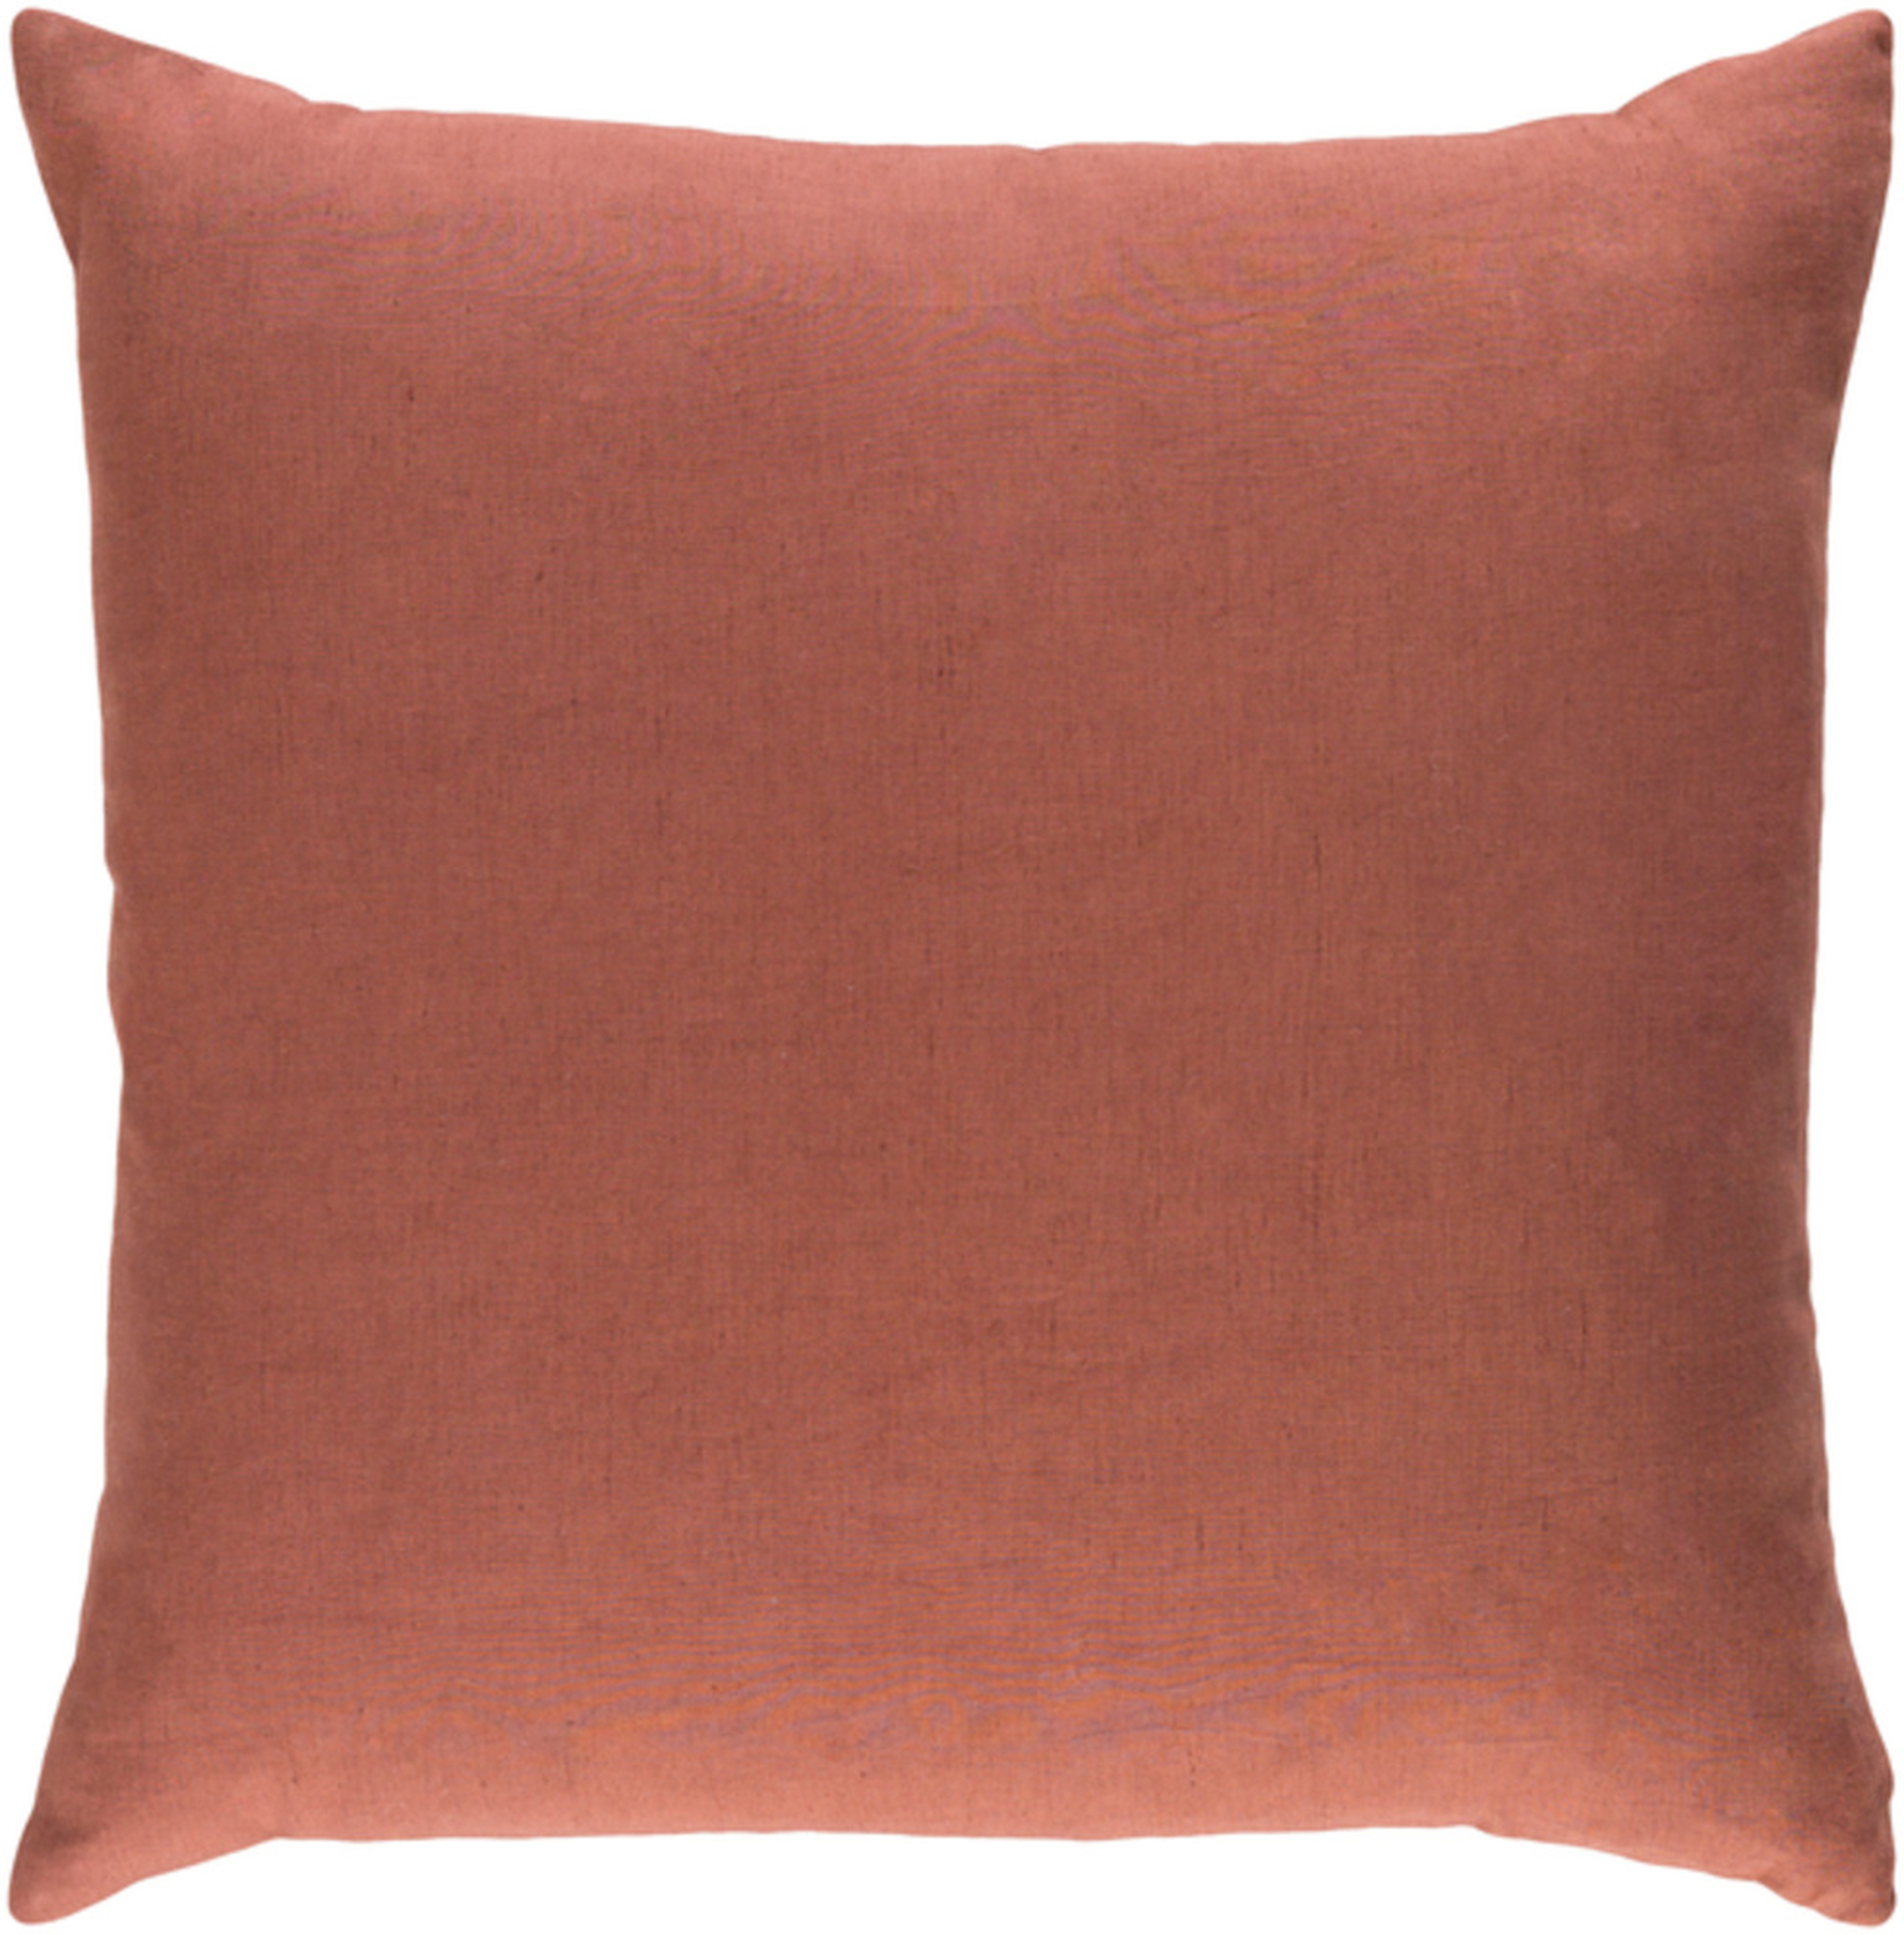 Ethiopia - ETPA-7208 - 18" x 18" - pillow cover only - Surya